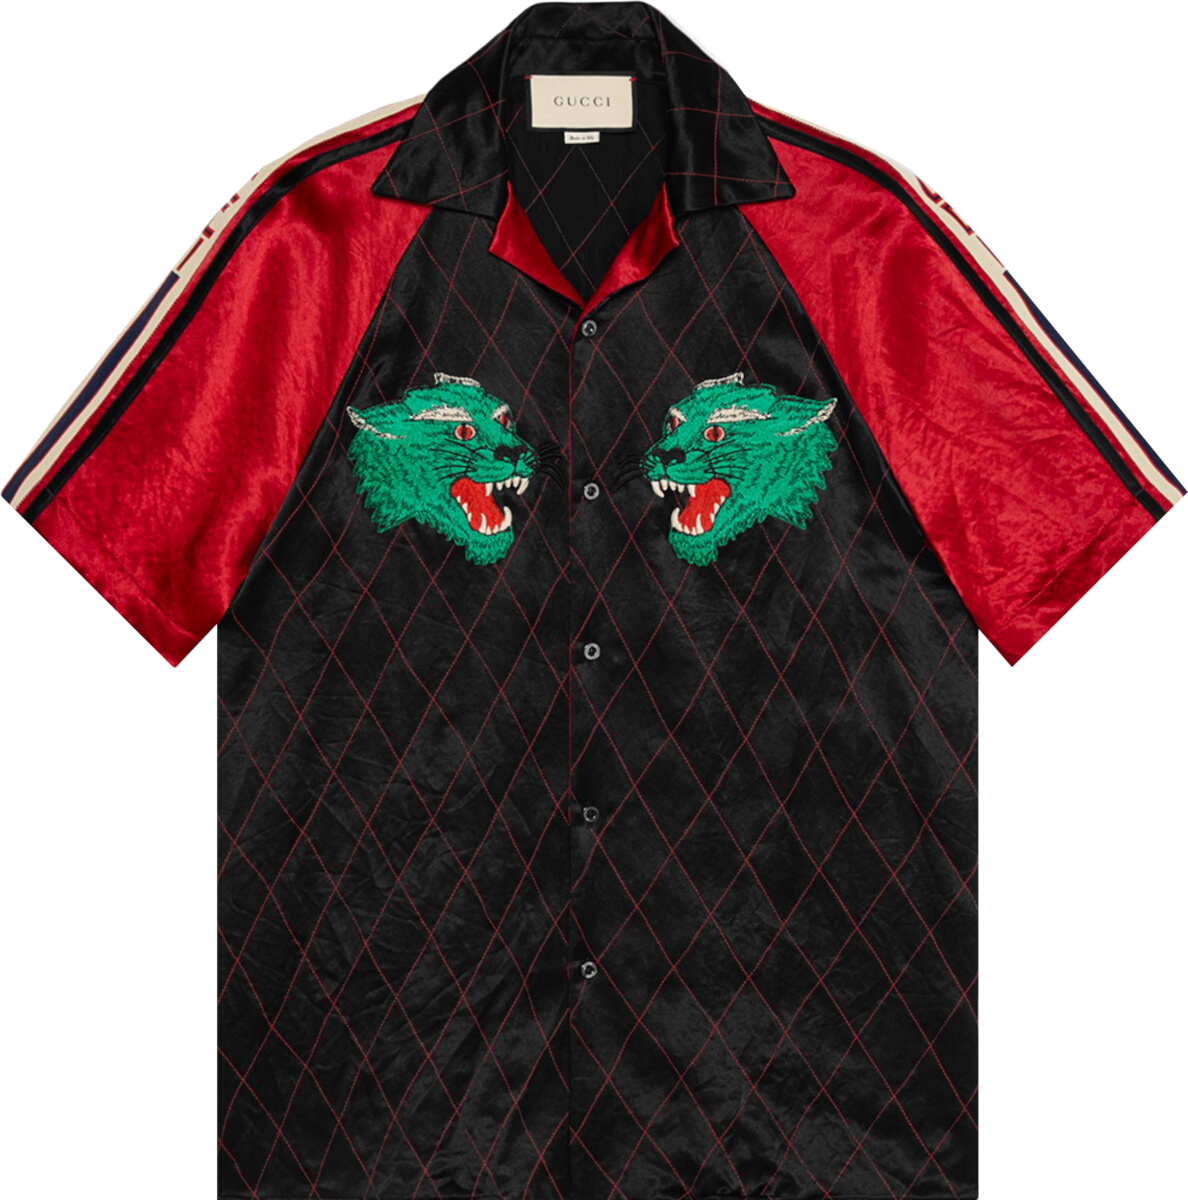 Gucci Black & Red Panther Bowling Shirt | Incorporated Style